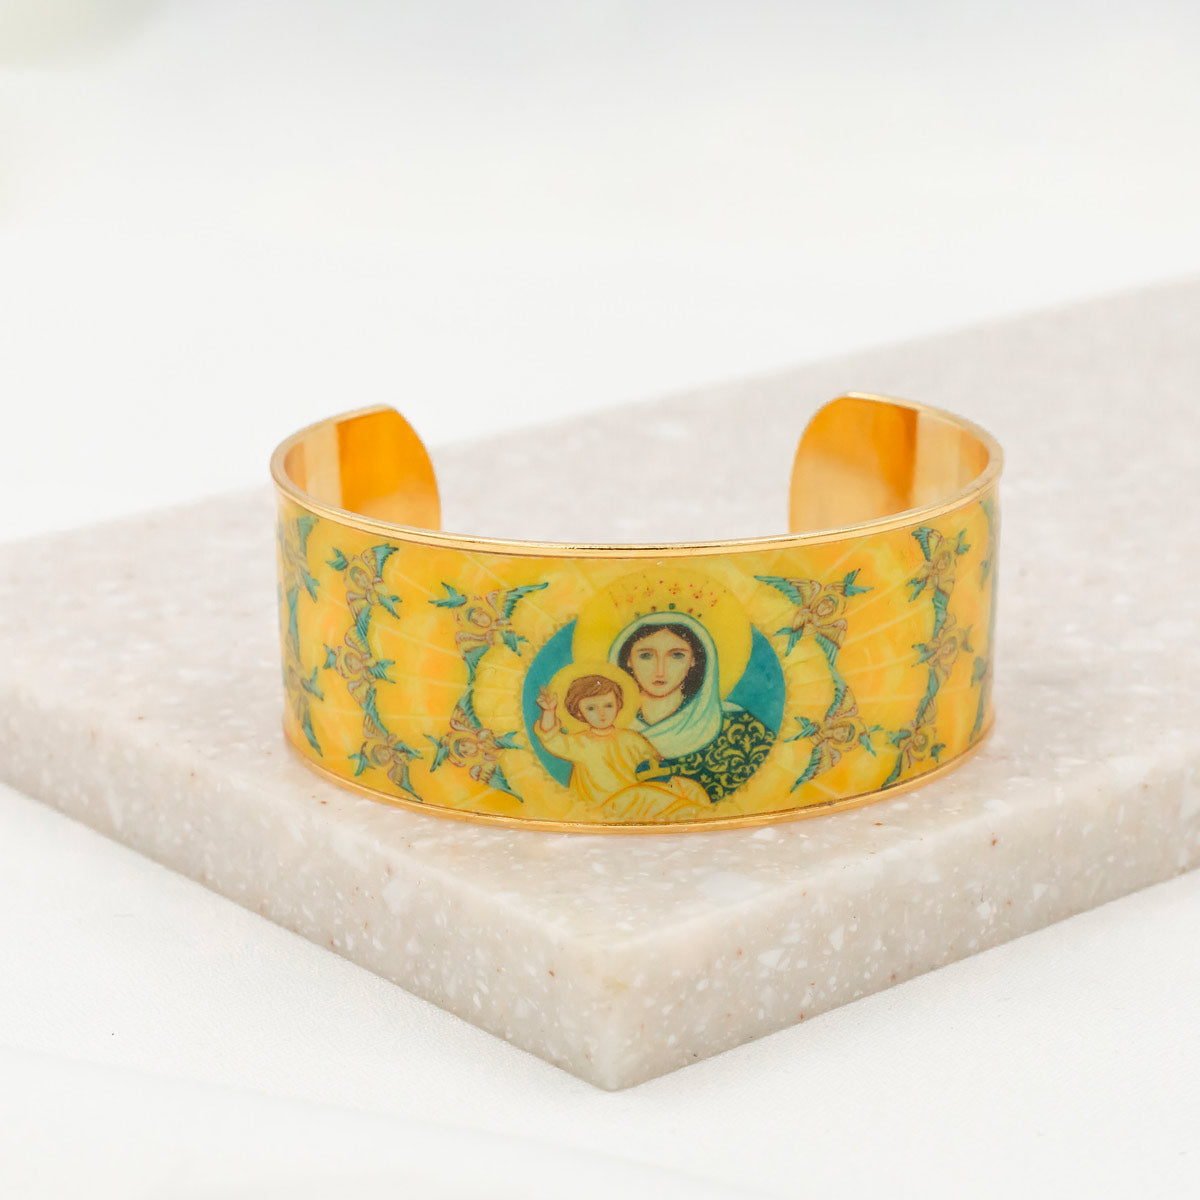 Magnificat Sacred Icon Cuff by My Saint My Hero